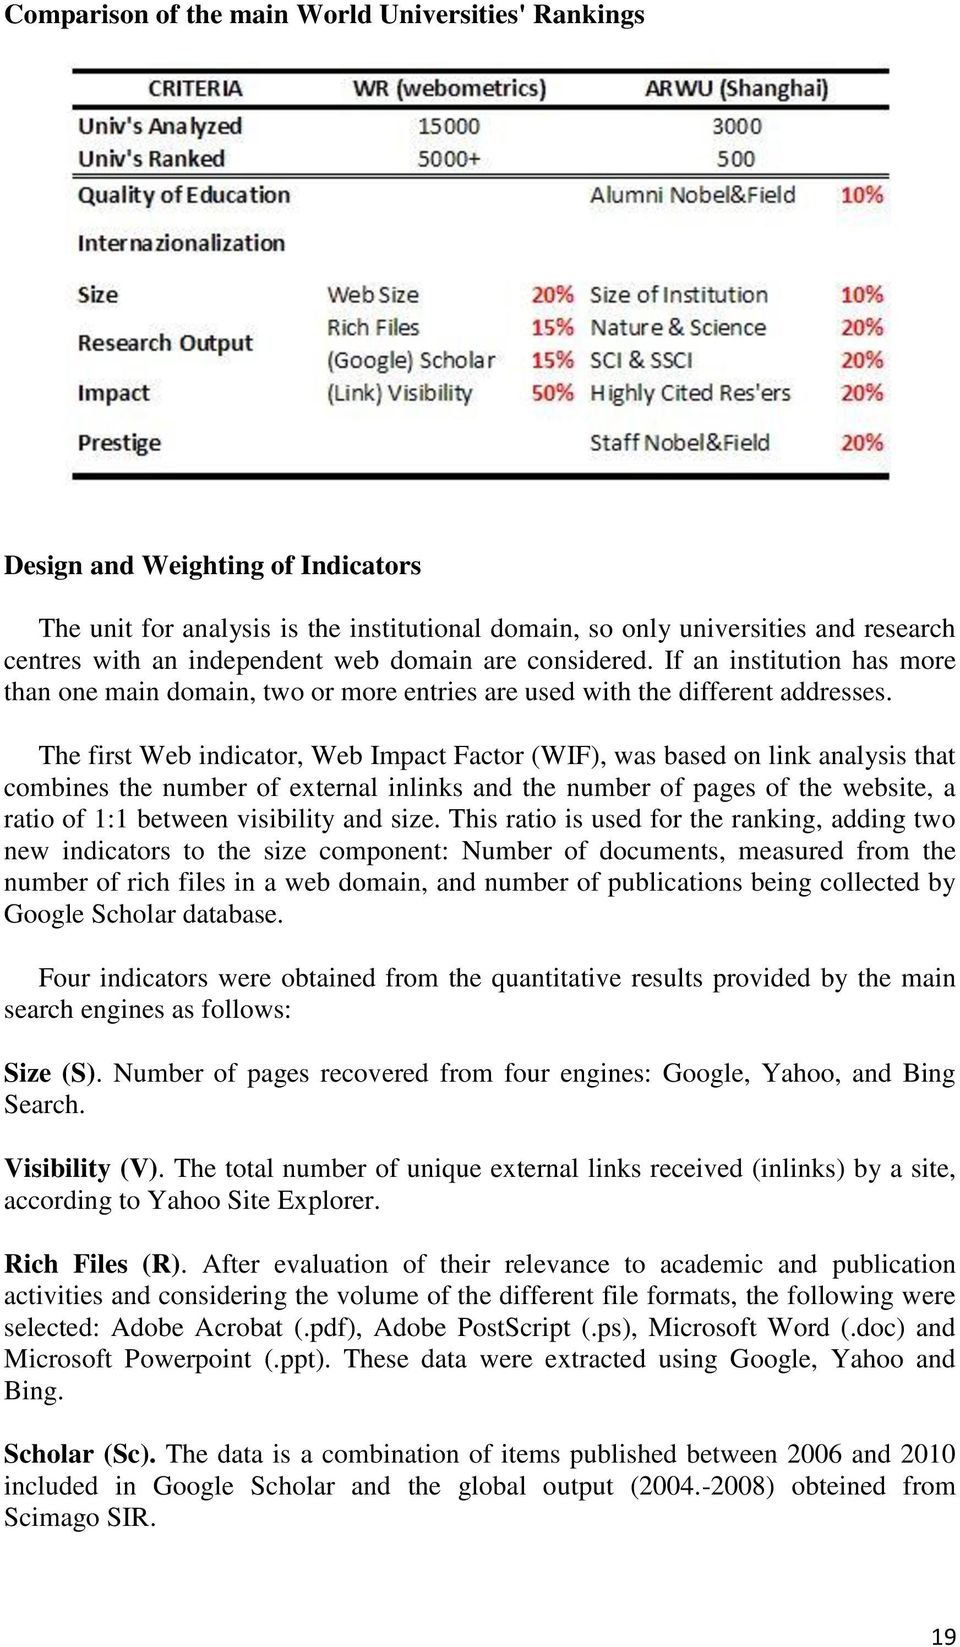 The first Web indicator, Web Impact Factor (WIF), was based on link analysis that combines the number of external inlinks and the number of pages of the website, a ratio of 1:1 between visibility and